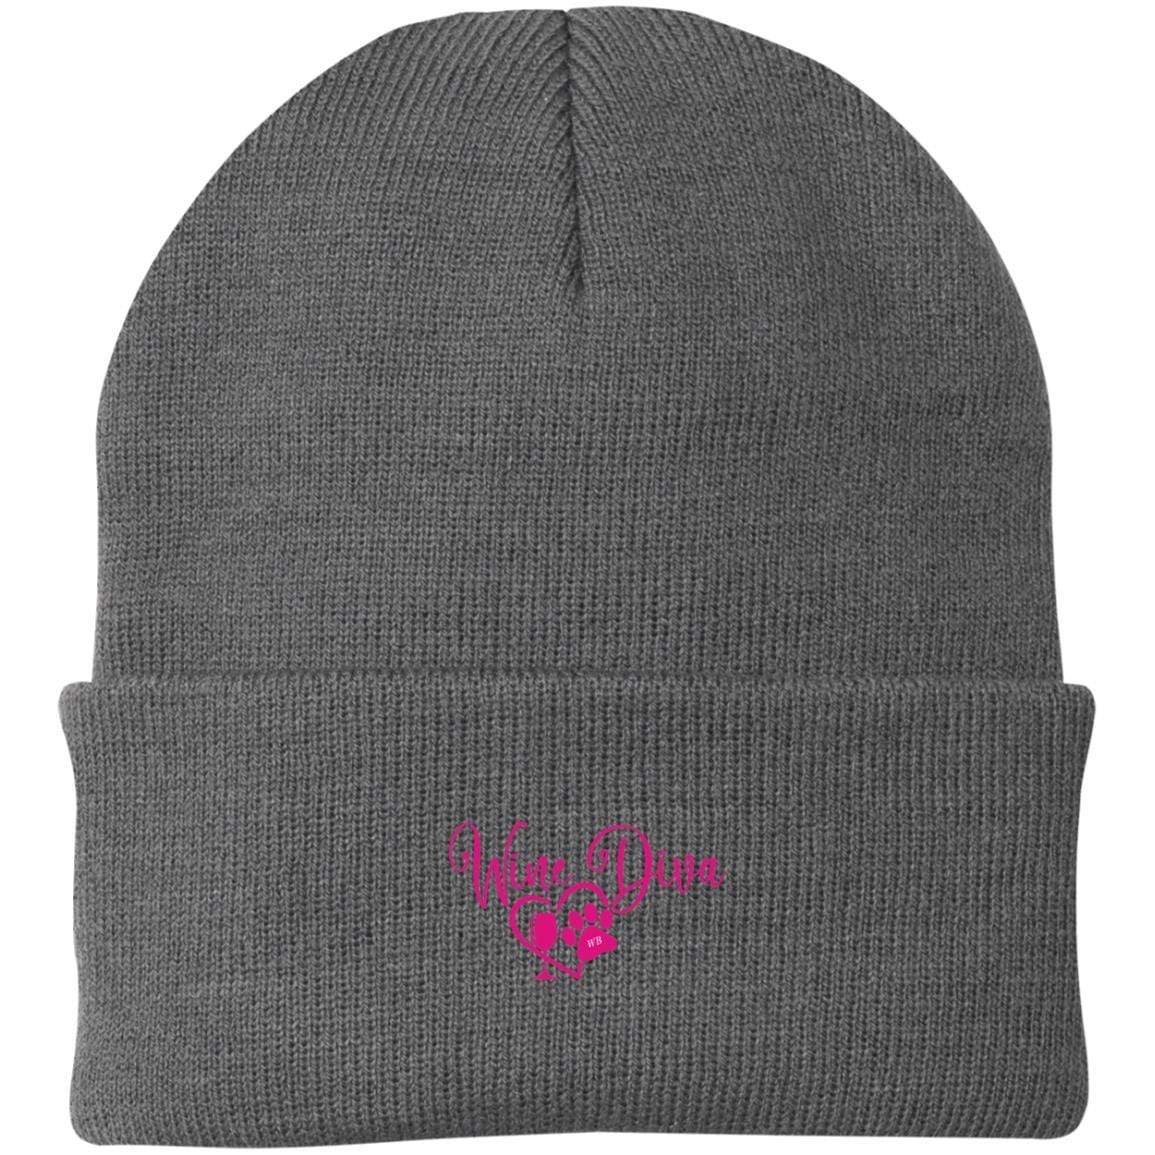 Hats Athletic Oxford / One Size Winey Bitches Co "Wine Diva" Embroidered Knit Cap WineyBitchesCo